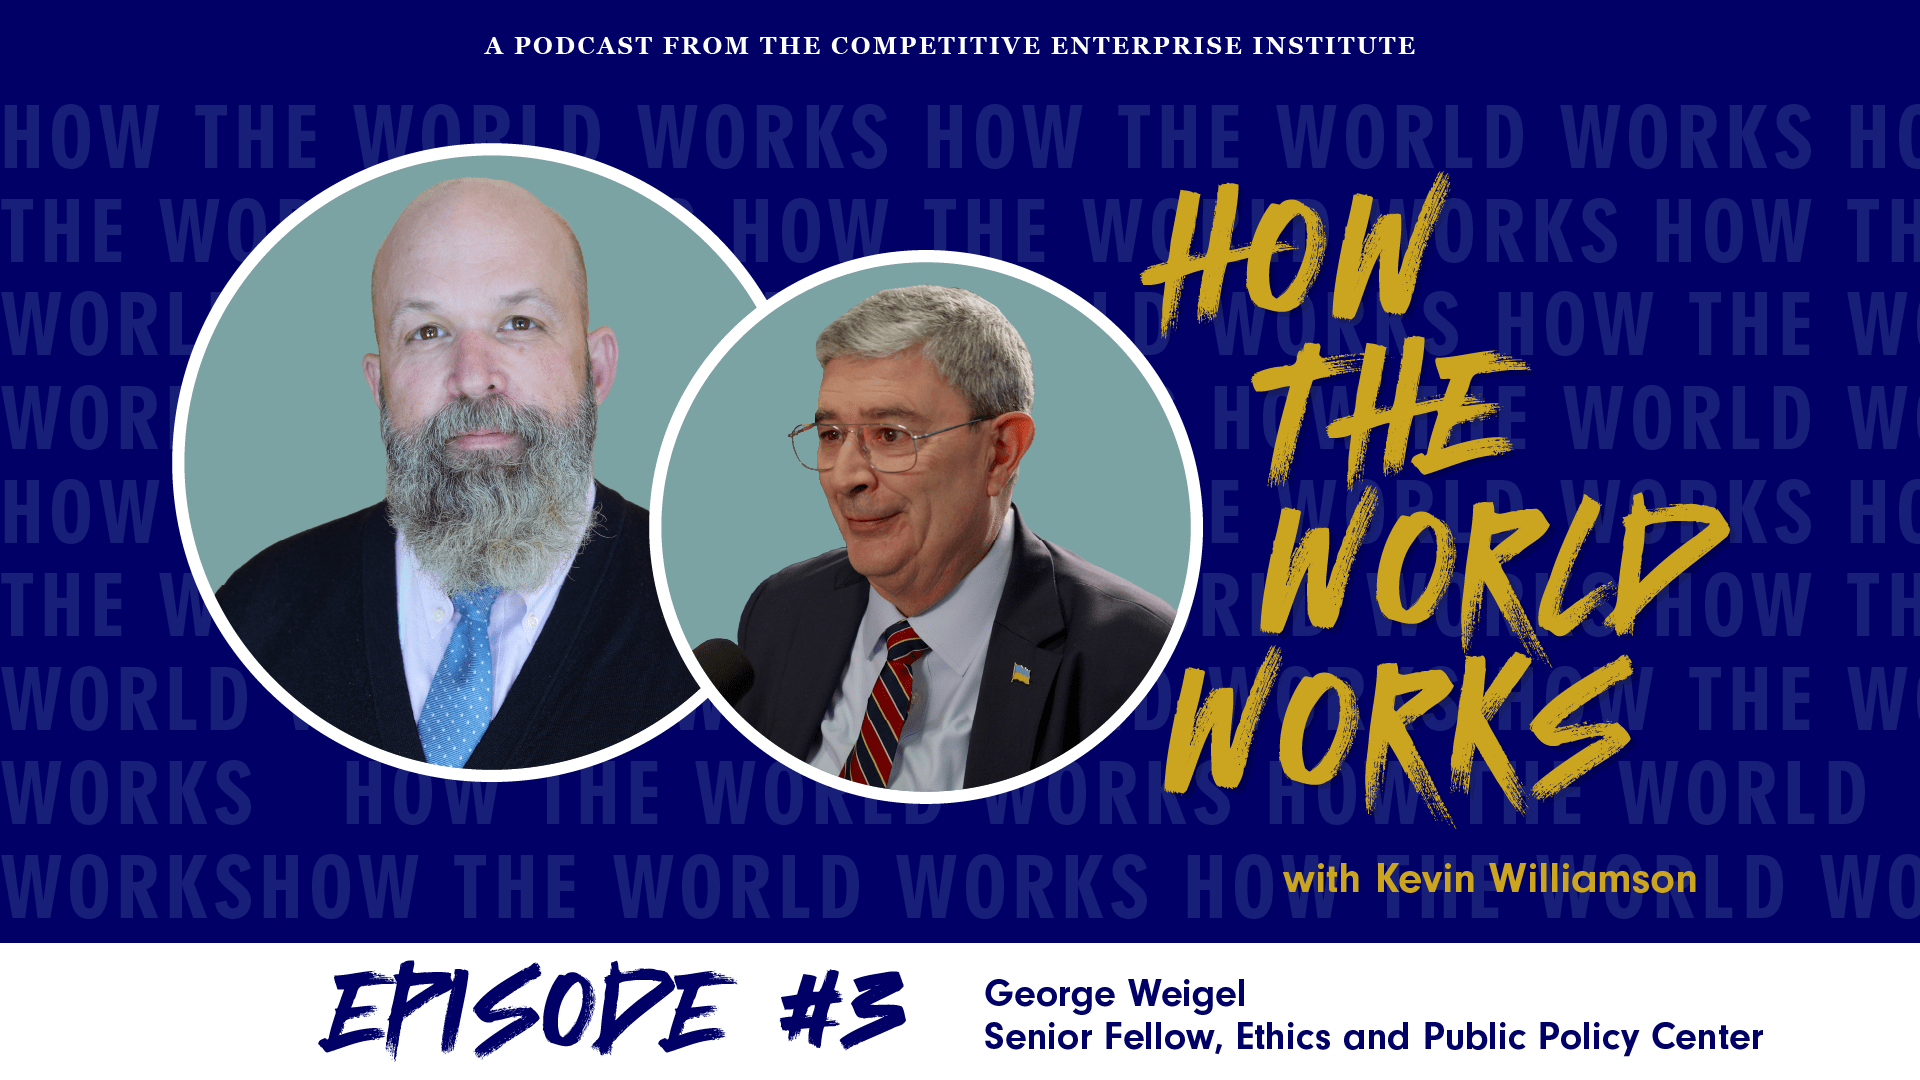 How the World Works Podcast with Guest George Weigel